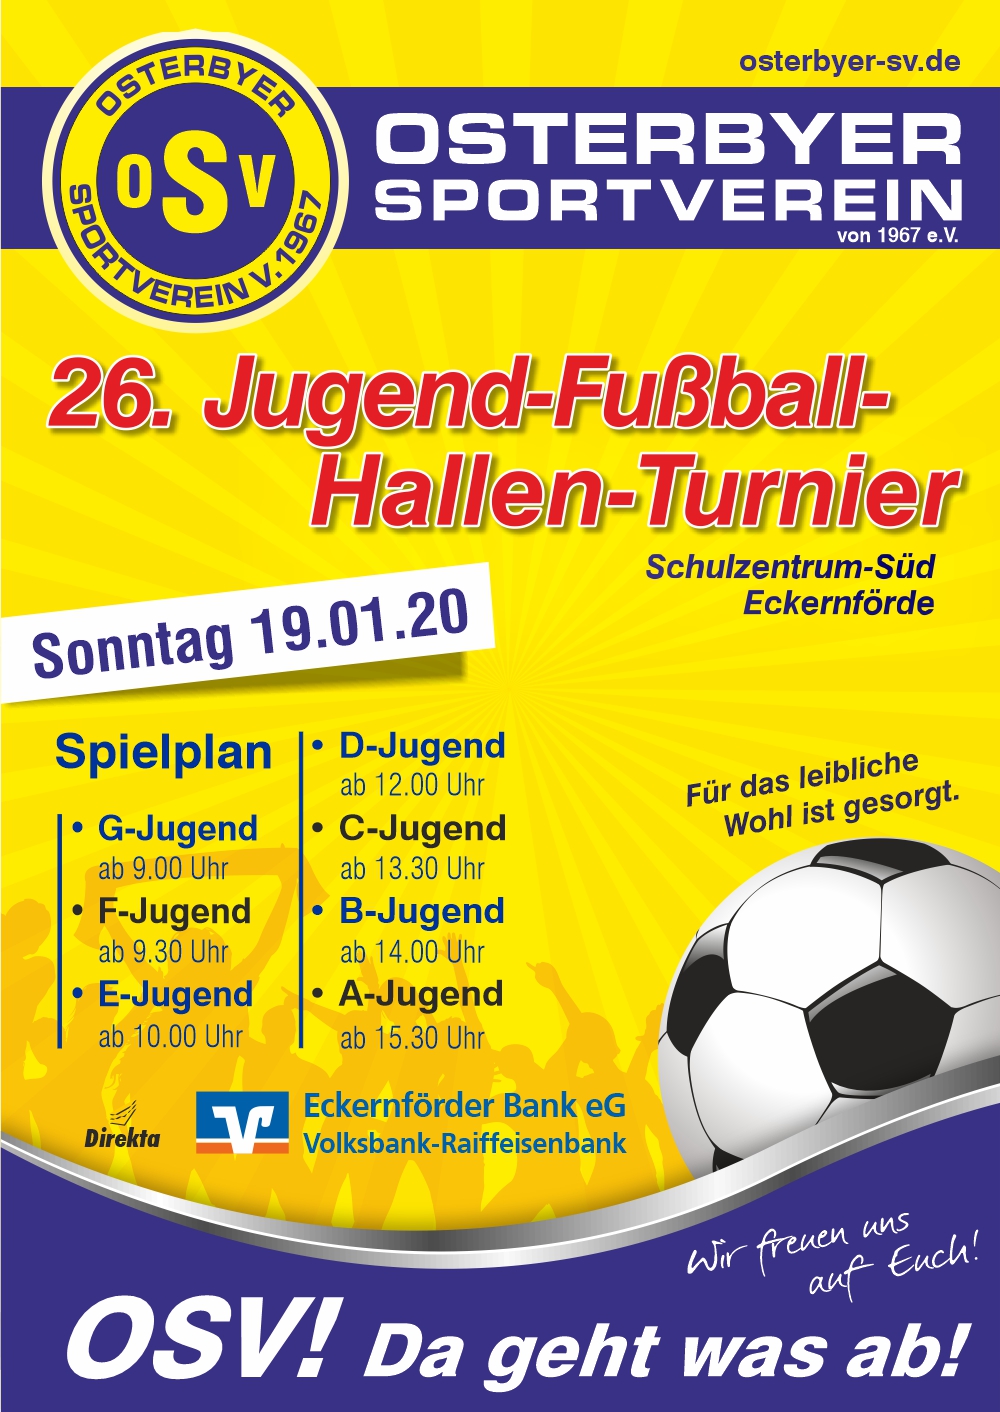 You are currently viewing 26. OSV Jugend-Fußball-Hallen-Turnier